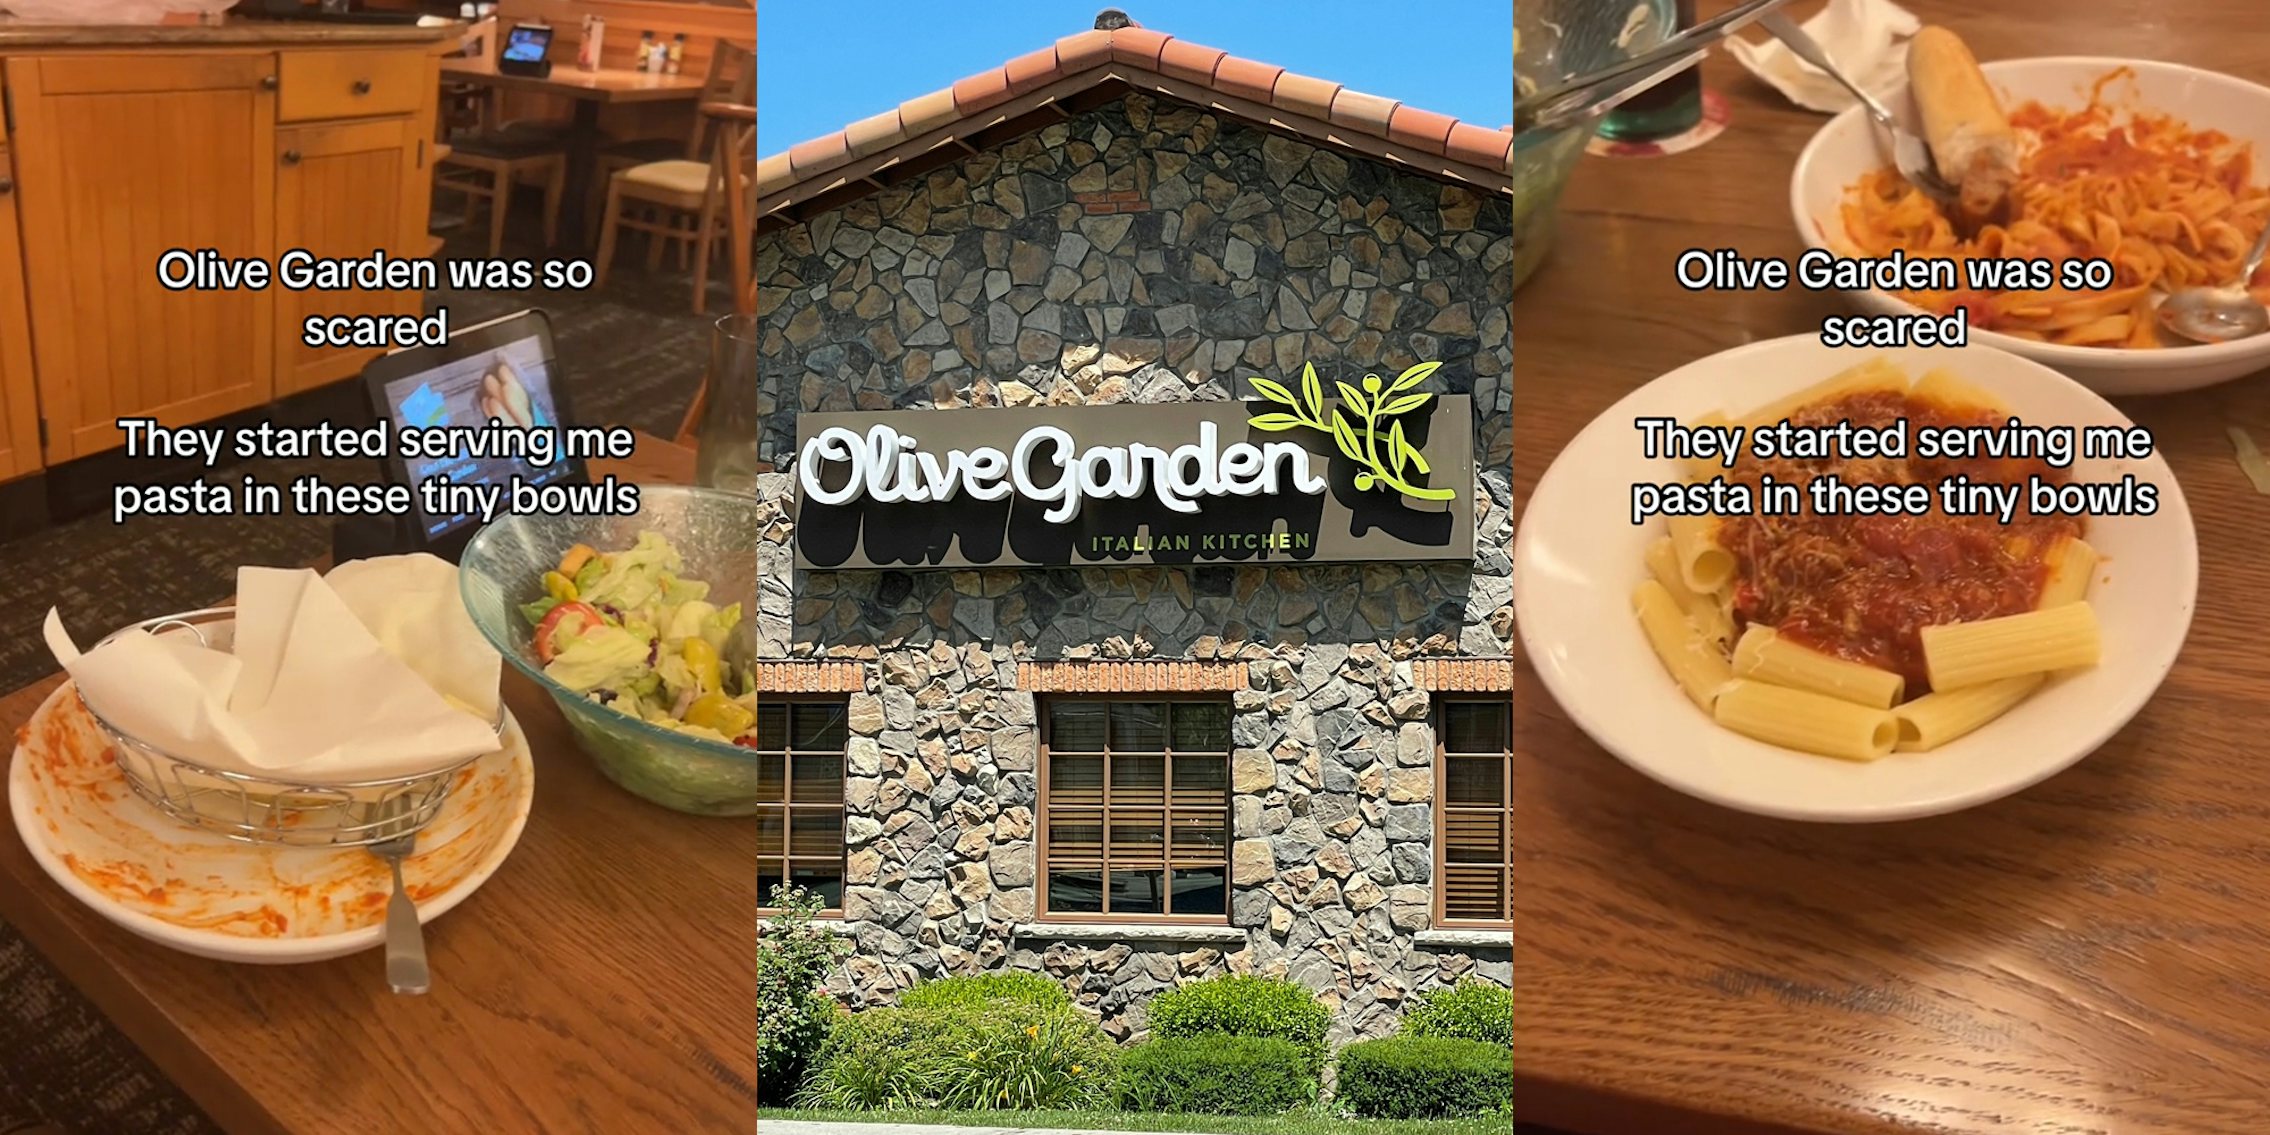 Olive Garden Takes Fries and Milkshakes Off the Kids' Menu - Eater